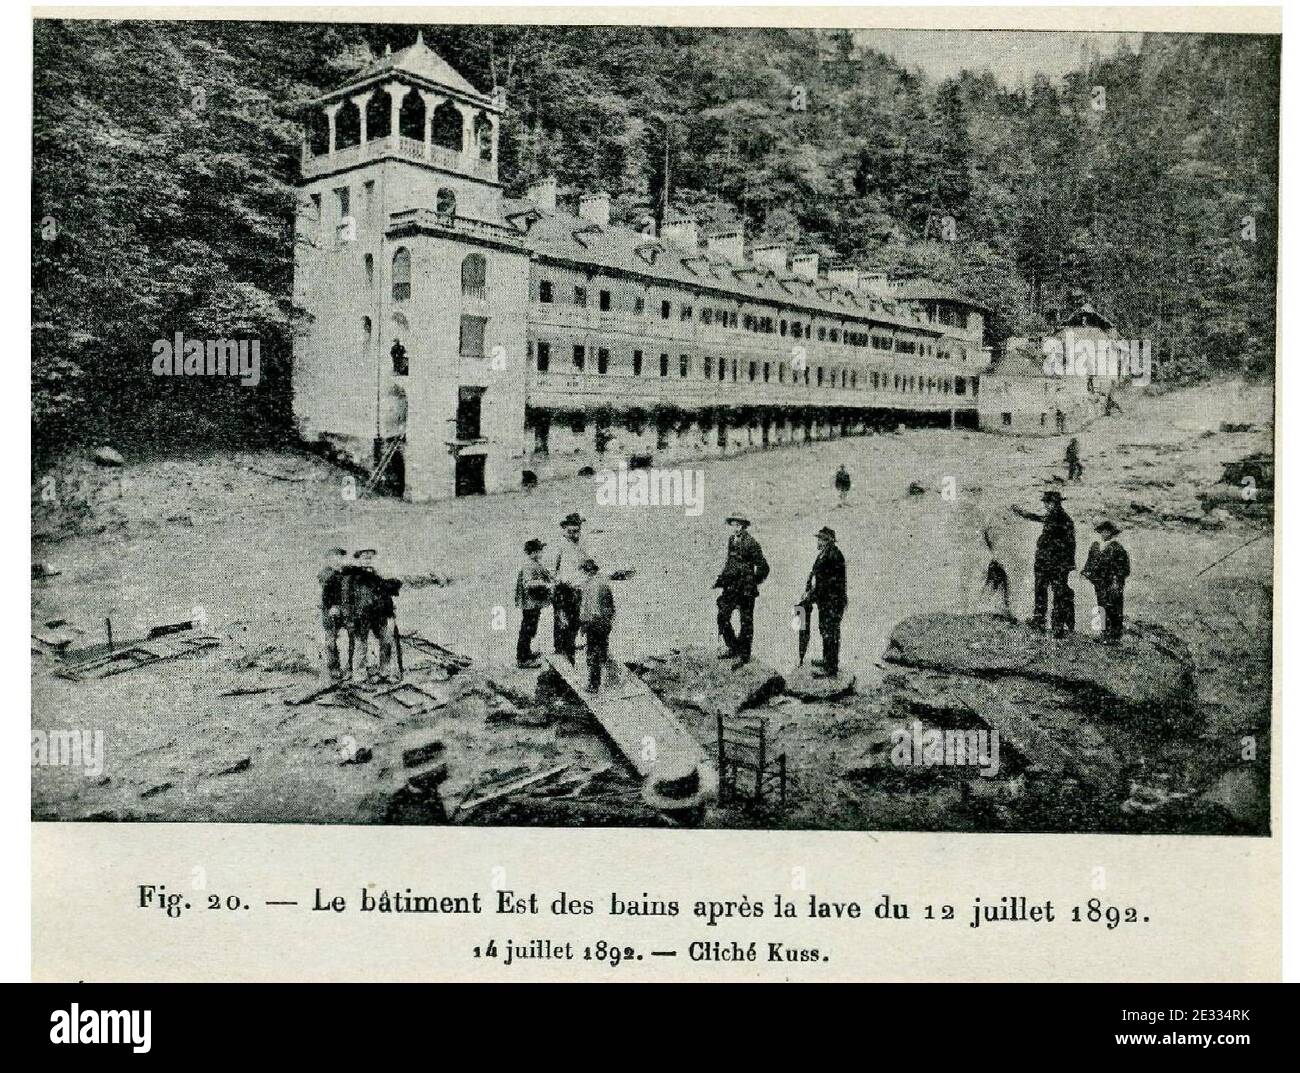 File picture dated July 14, 1892 after the catastrophe of the Tete-Rousse glacier on Mont Blanc, in Saint-Gervais, southeastern France. On August 25, 2010, French engineers began an operation to remove 65,000 cubic meters of water underneath the glacier. The hidden lake threatens to flood the Saint-Gervais valley, a tourist destination and home to 3,000 people in the French Alps. The engineers are drilling a hole into the ice to pump out the water. In 1892, water from an underground lake flooded the same valley and killed 175 people. Photo by Daniel Giry/ABACAPRESS.COM. Stock Photo